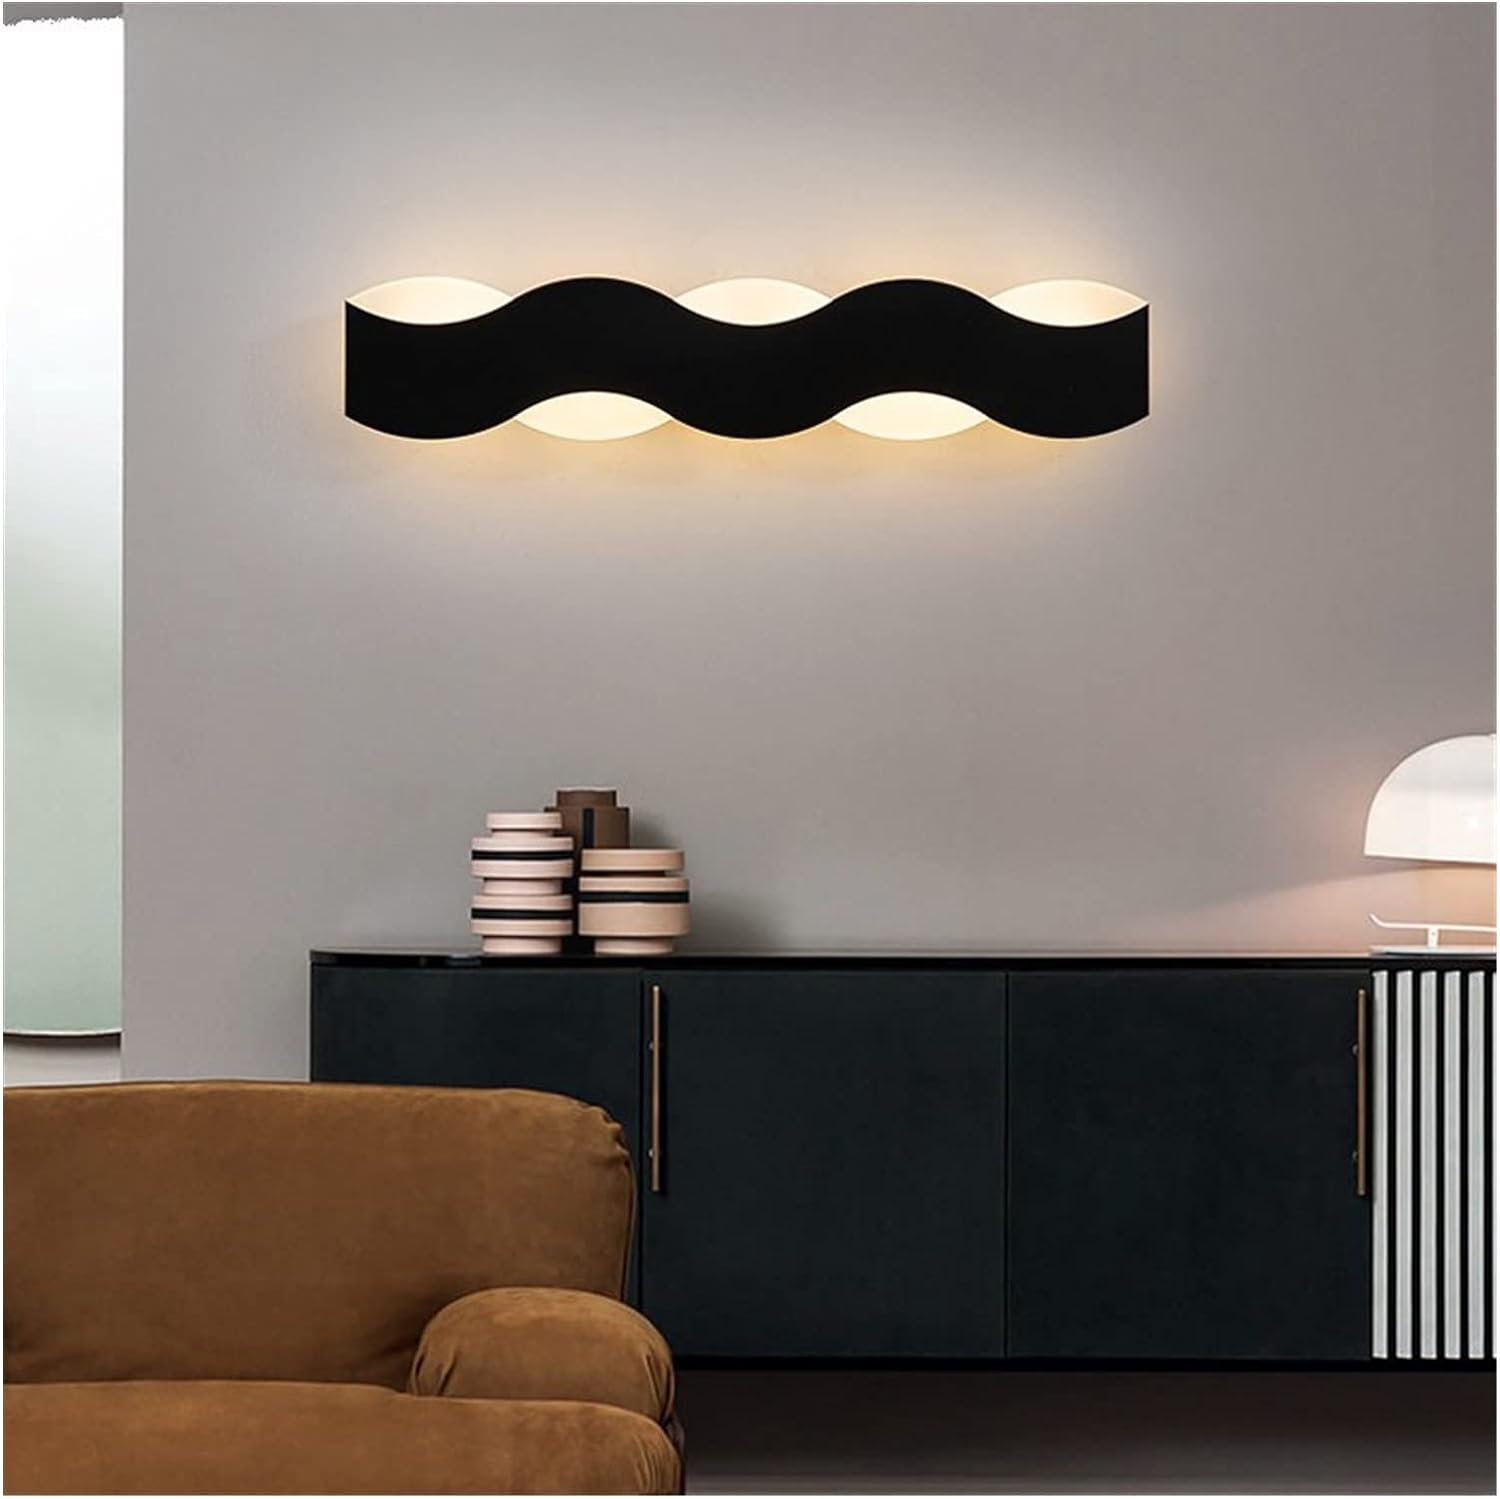 Bali Wave Outdoor Linear Wall Light - Future Light - LED Lights South Africa